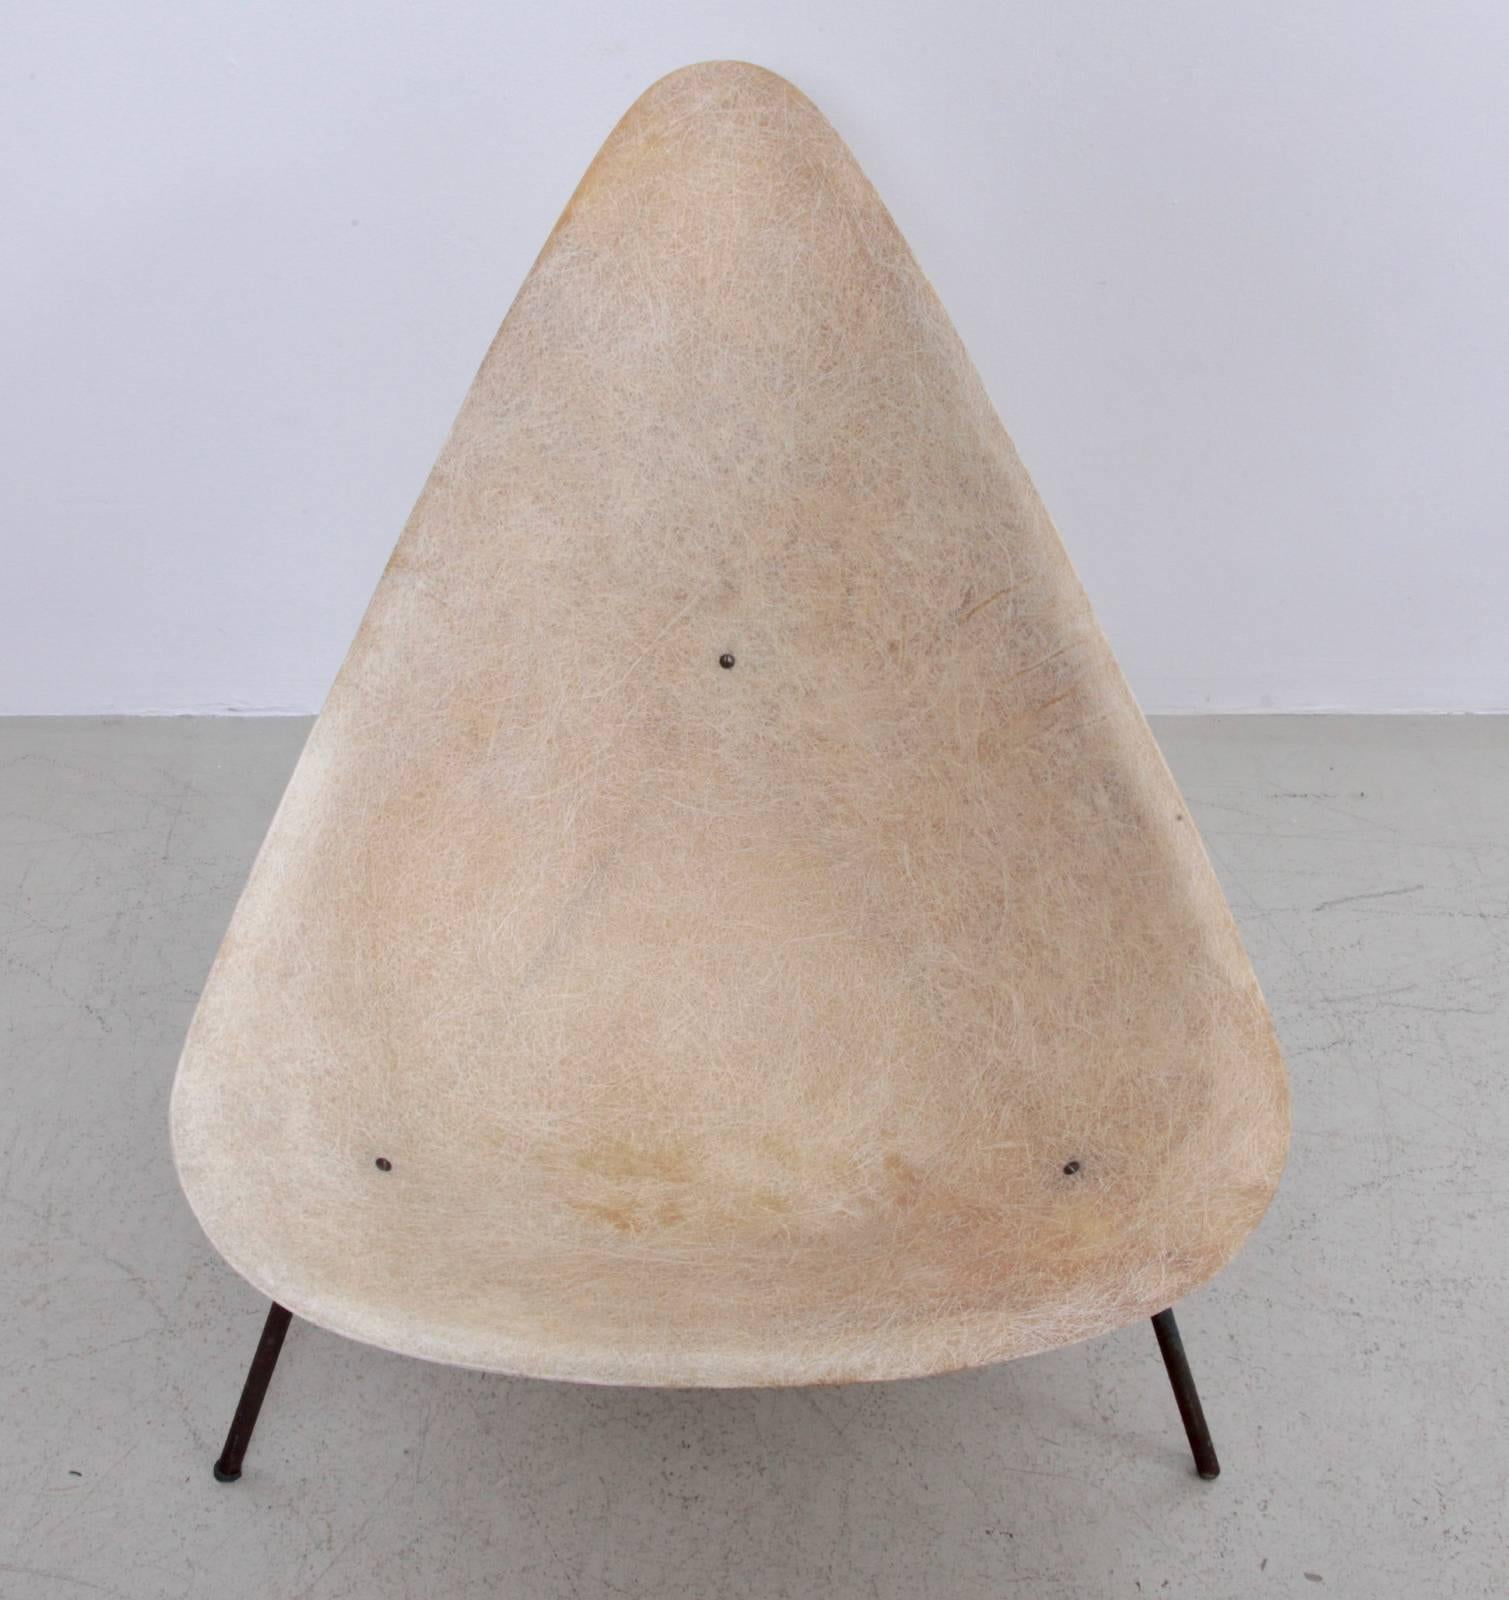 Steel Early French Fiberglass Lounge Chair in Parchment by Ed Merat, France, 1956